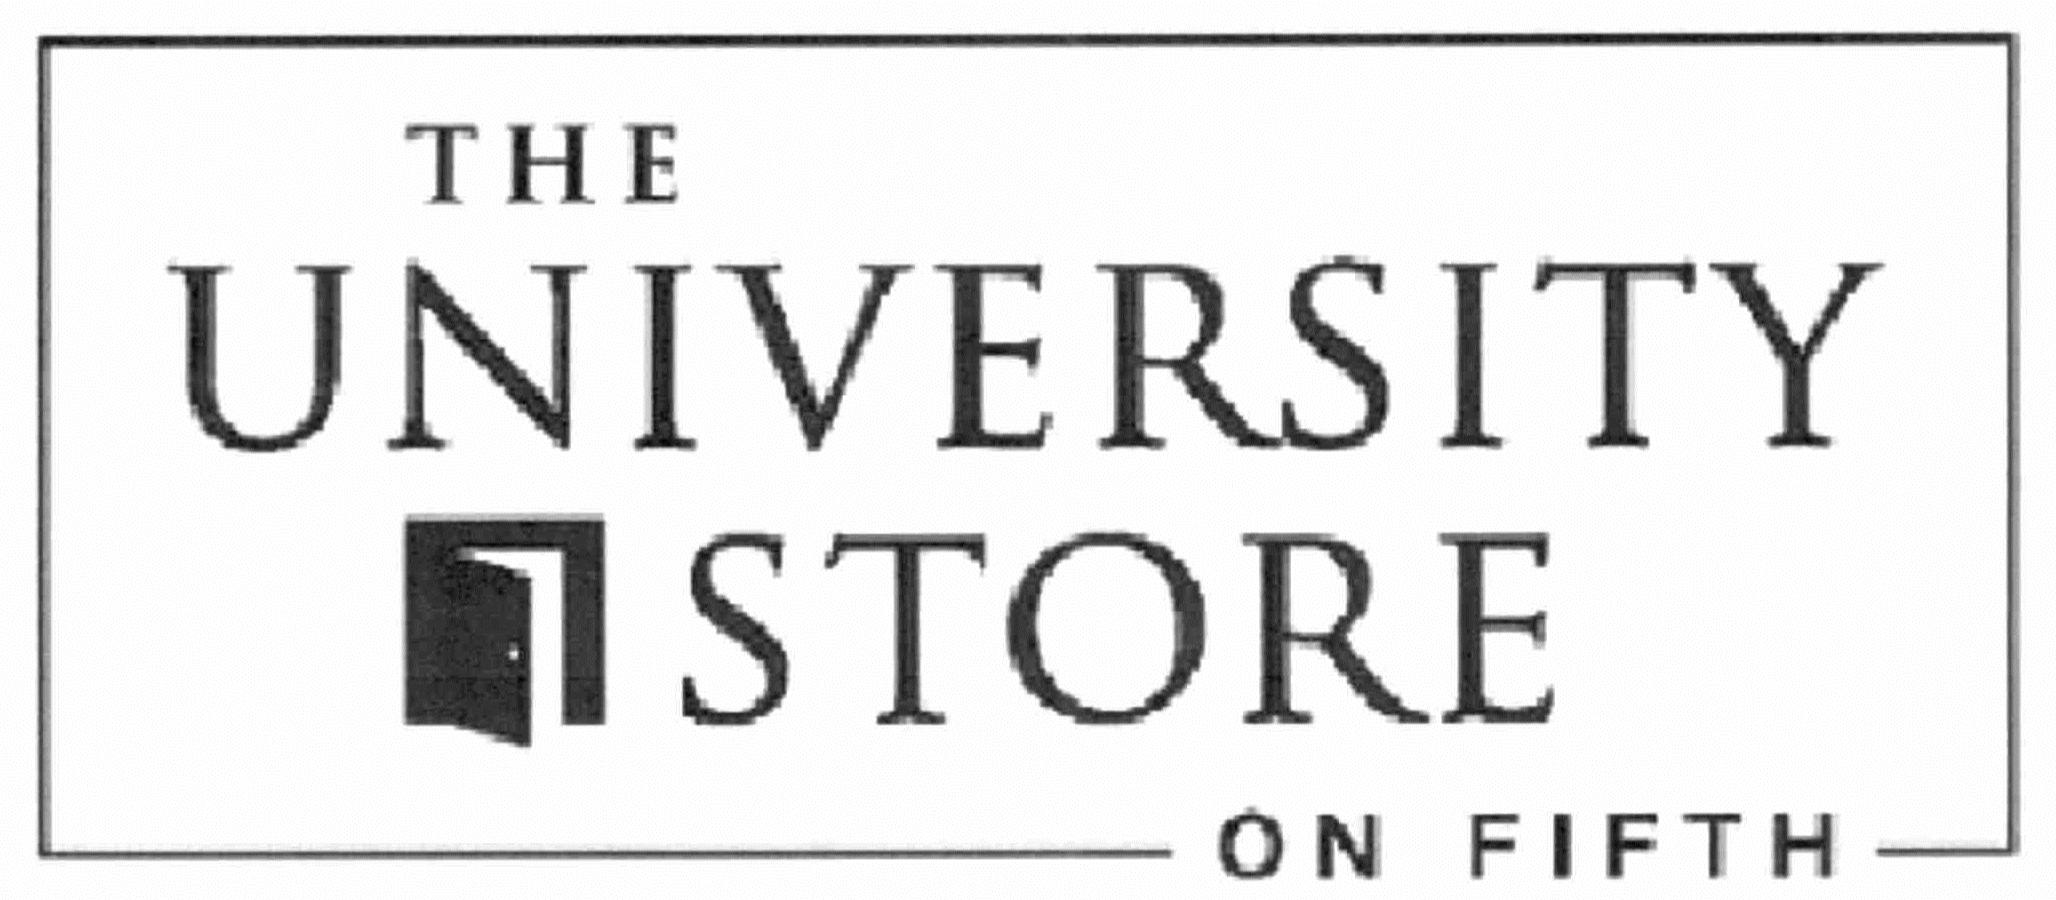  THE UNIVERSITY STORE ON FIFTH